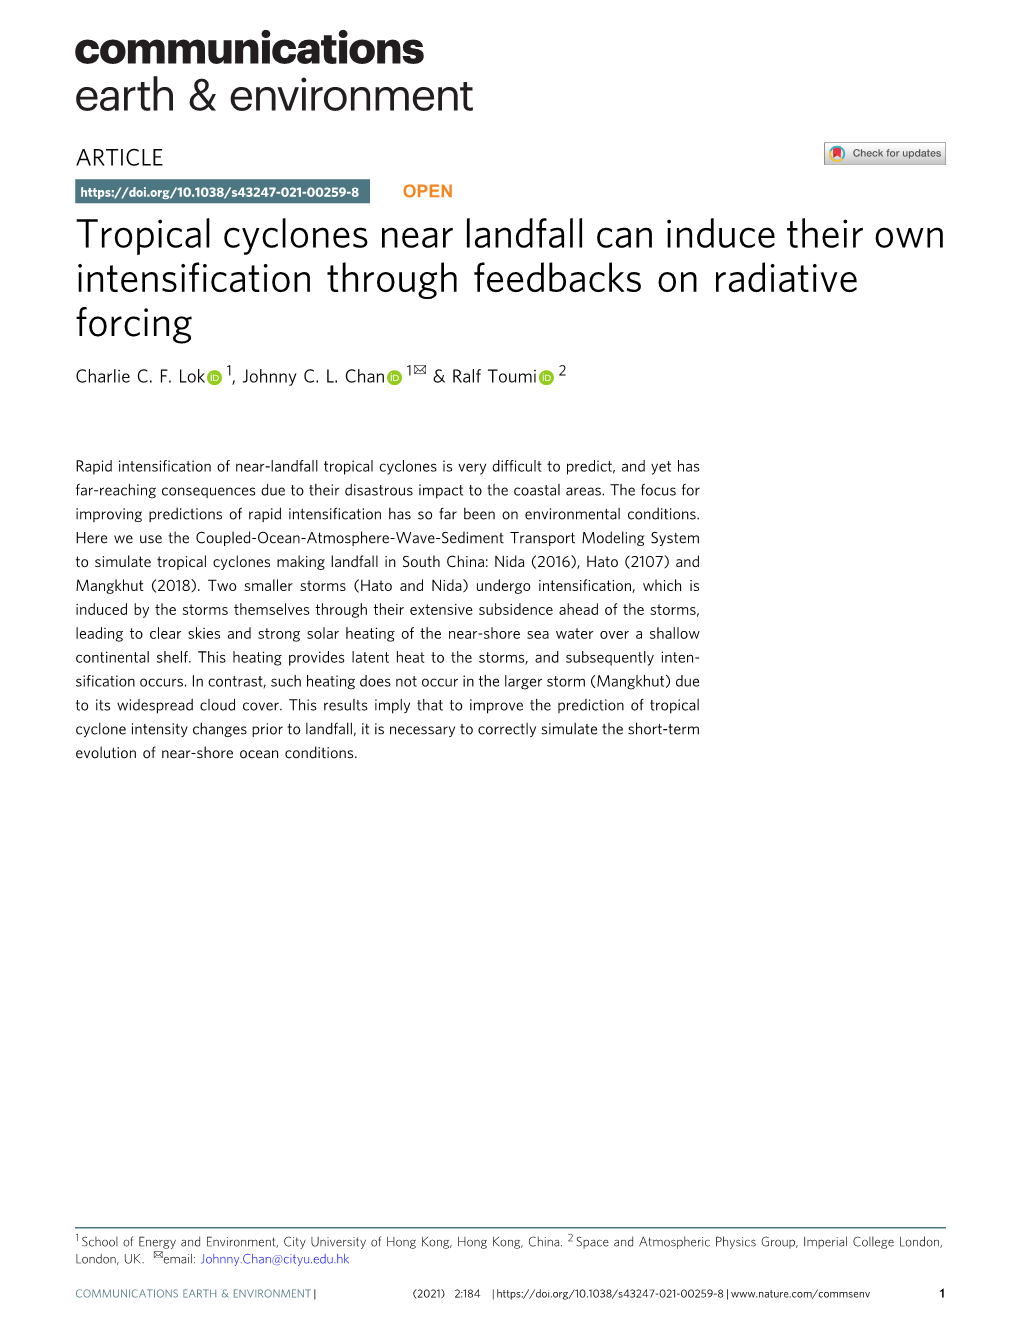 Tropical Cyclones Near Landfall Can Induce Their Own Intensification